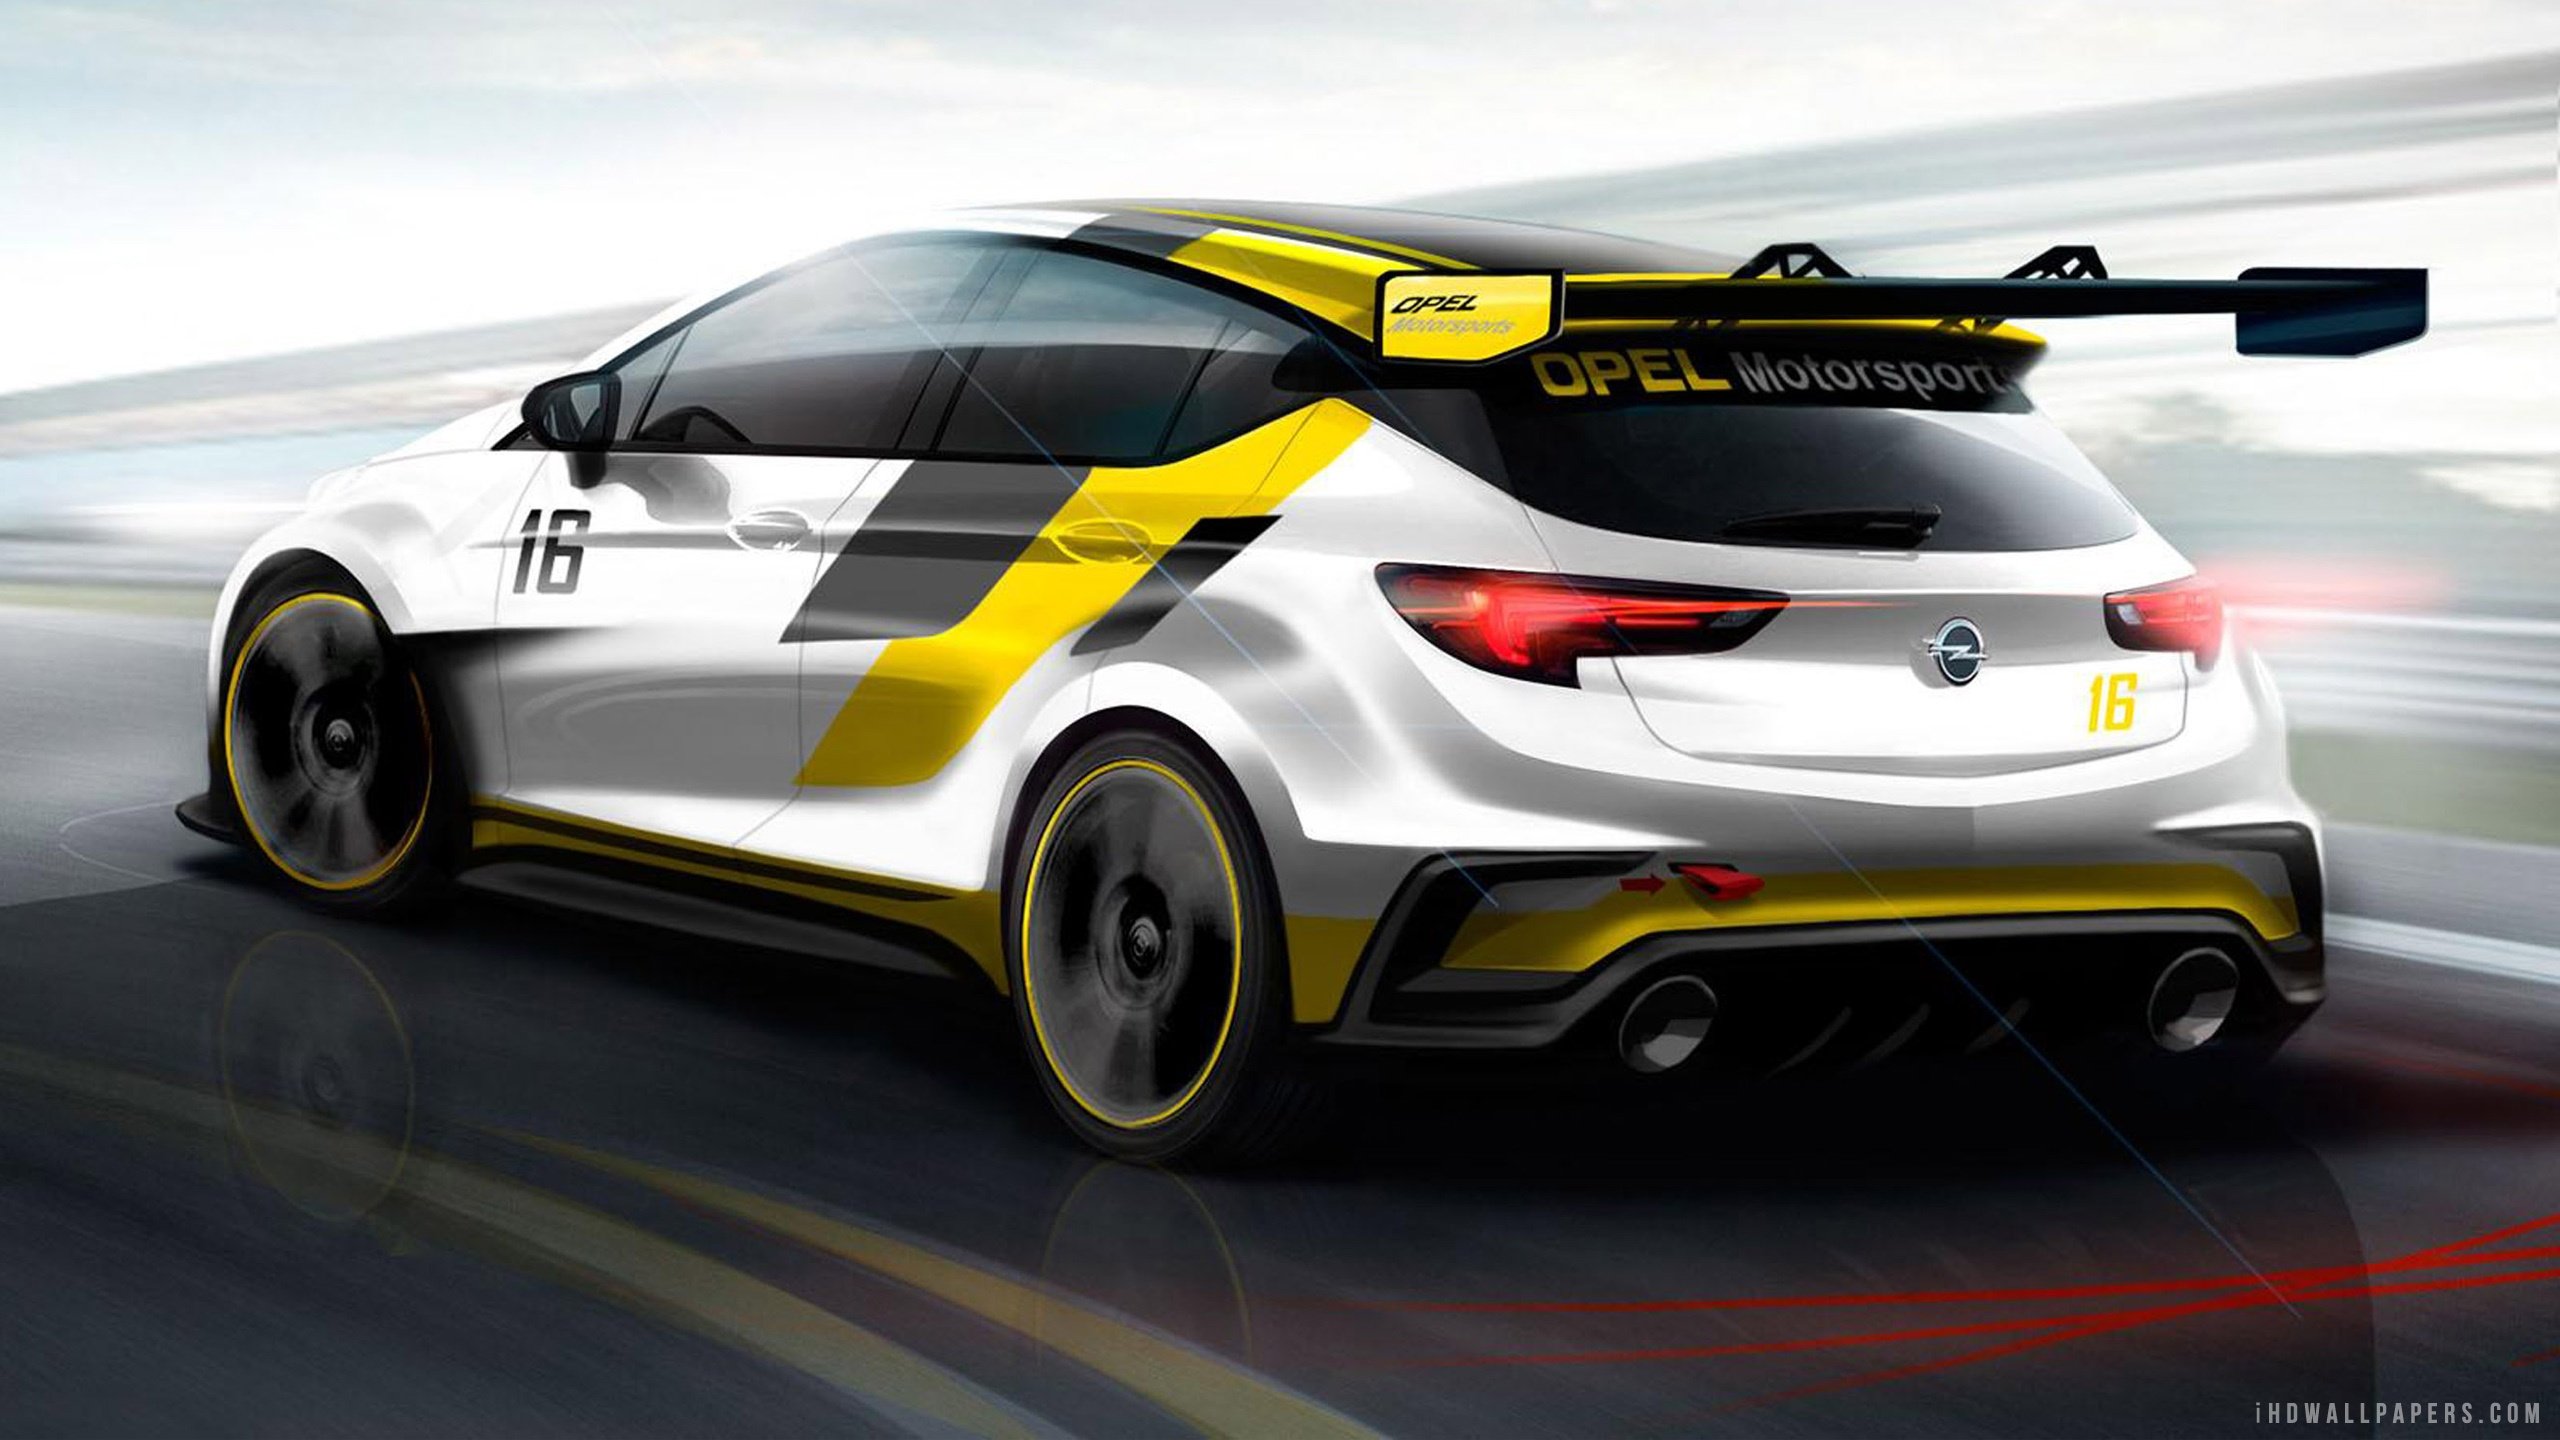 2016, Opel, Astra, Tcr, Rally, Race, Racing Wallpaper